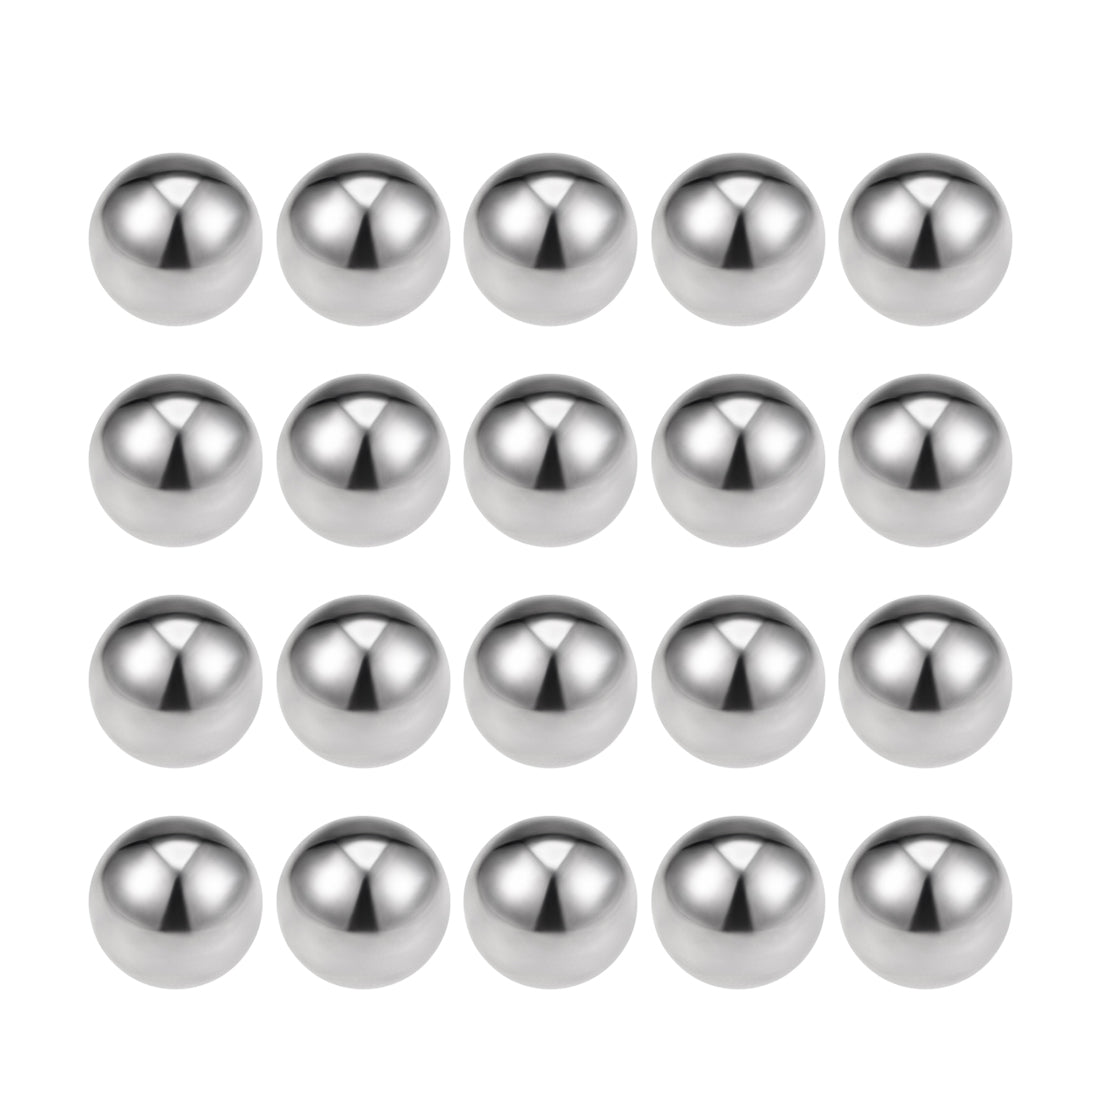 Uxcell Uxcell 1/4" Bearing Balls 316L Stainless Steel G100 Precision Balls 100pcs